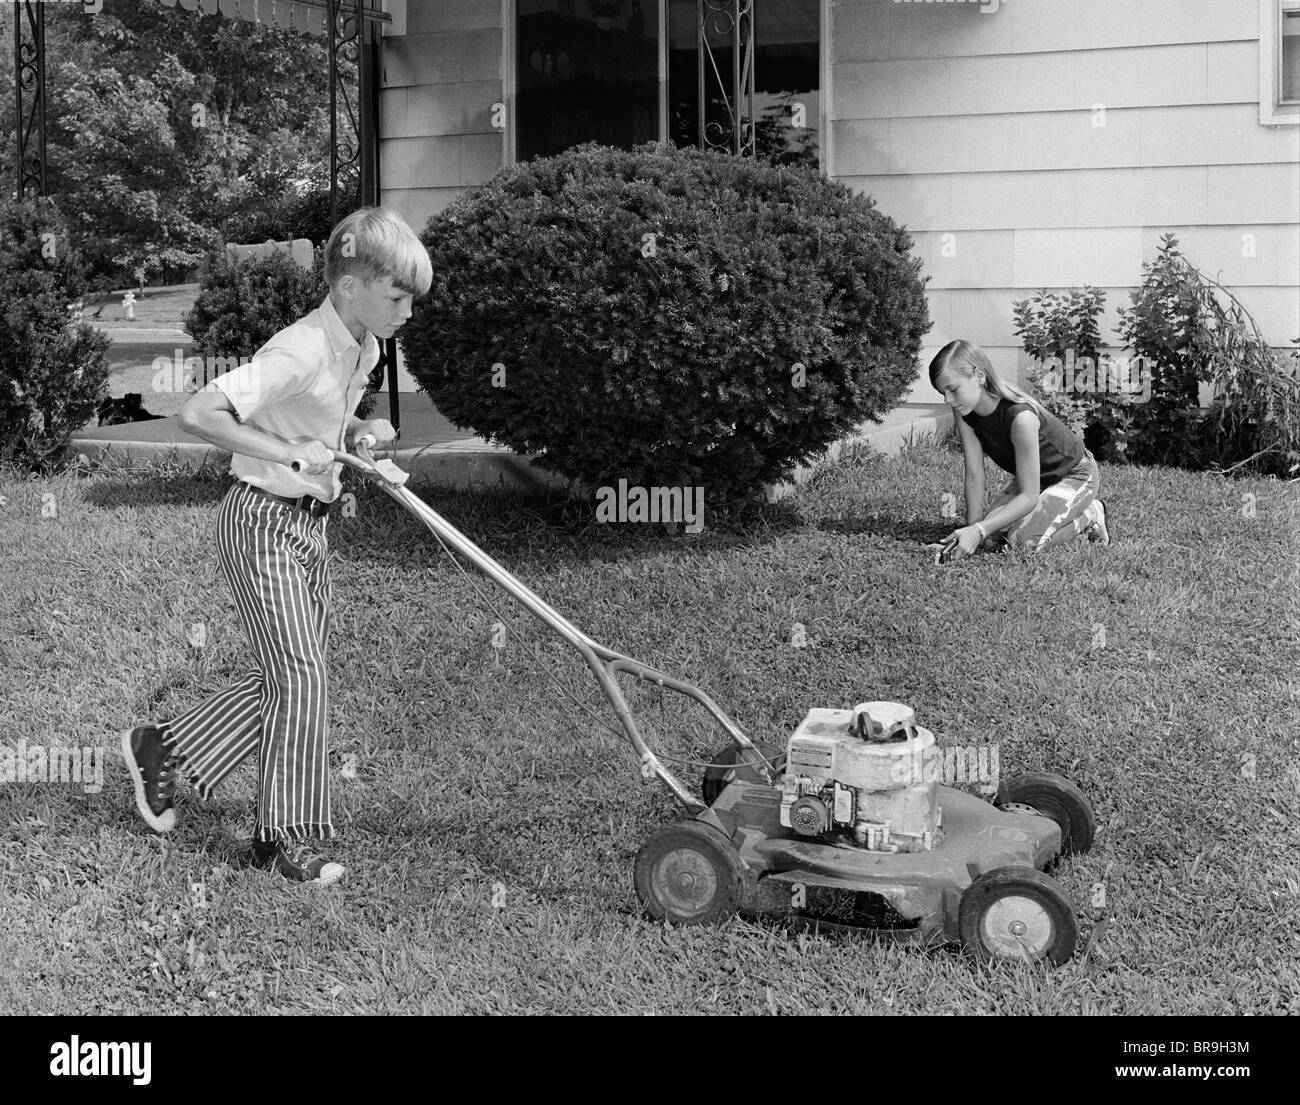 1970s BROTHER AND SISTER DOING CHORES MOWING LAWN CUTTING GRASS YARD WORK TOGETHER Stock Photo